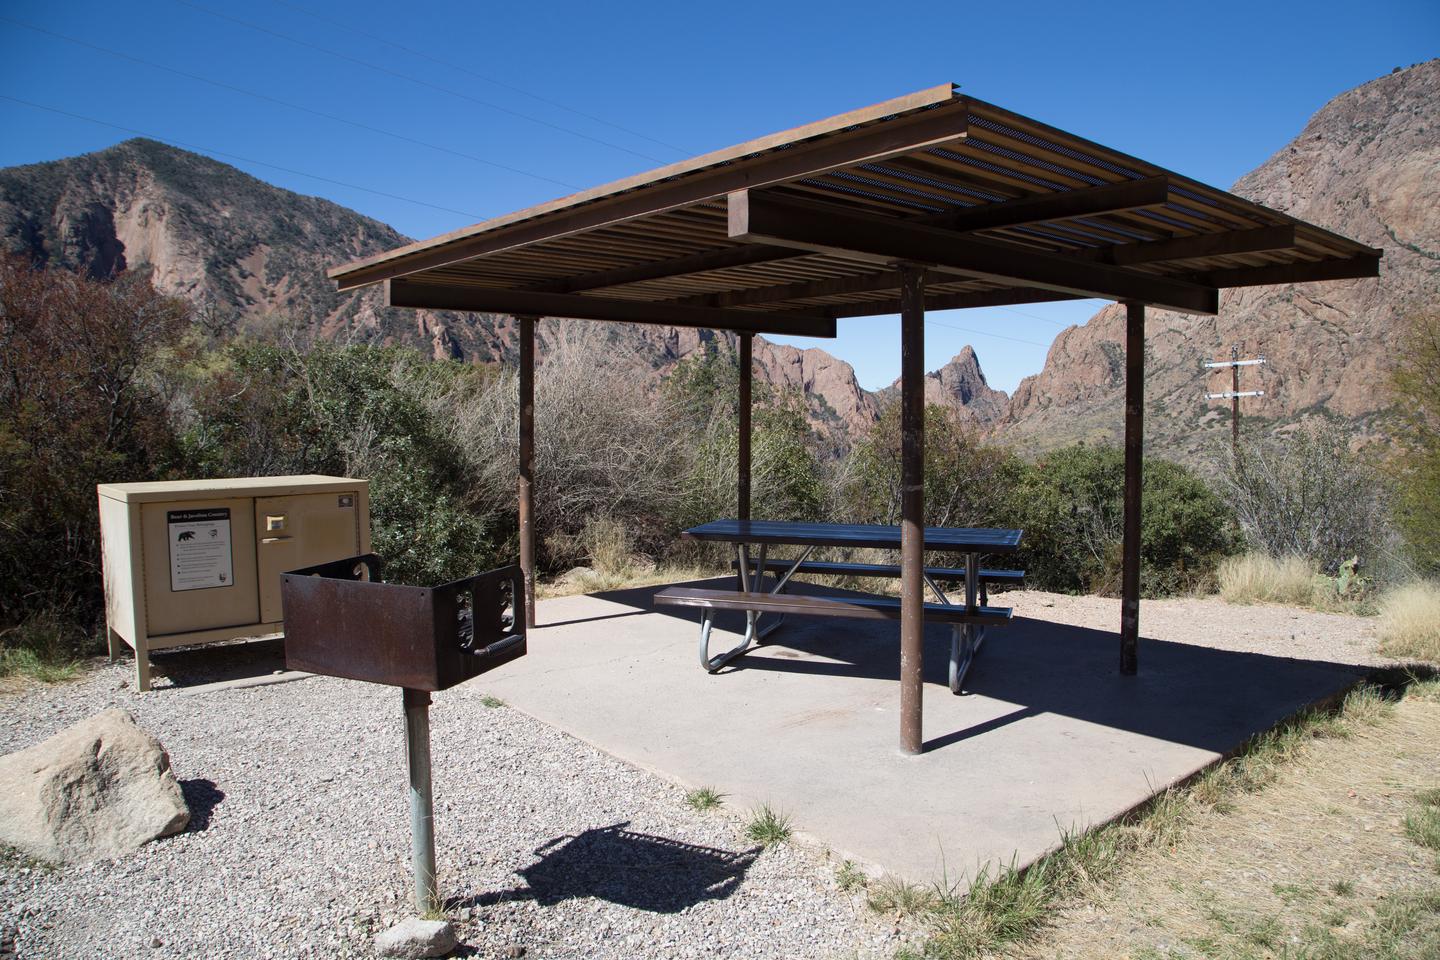 Great site with a viewGreat site with a view. Shade shelter, picnic table, grill and bear box. 